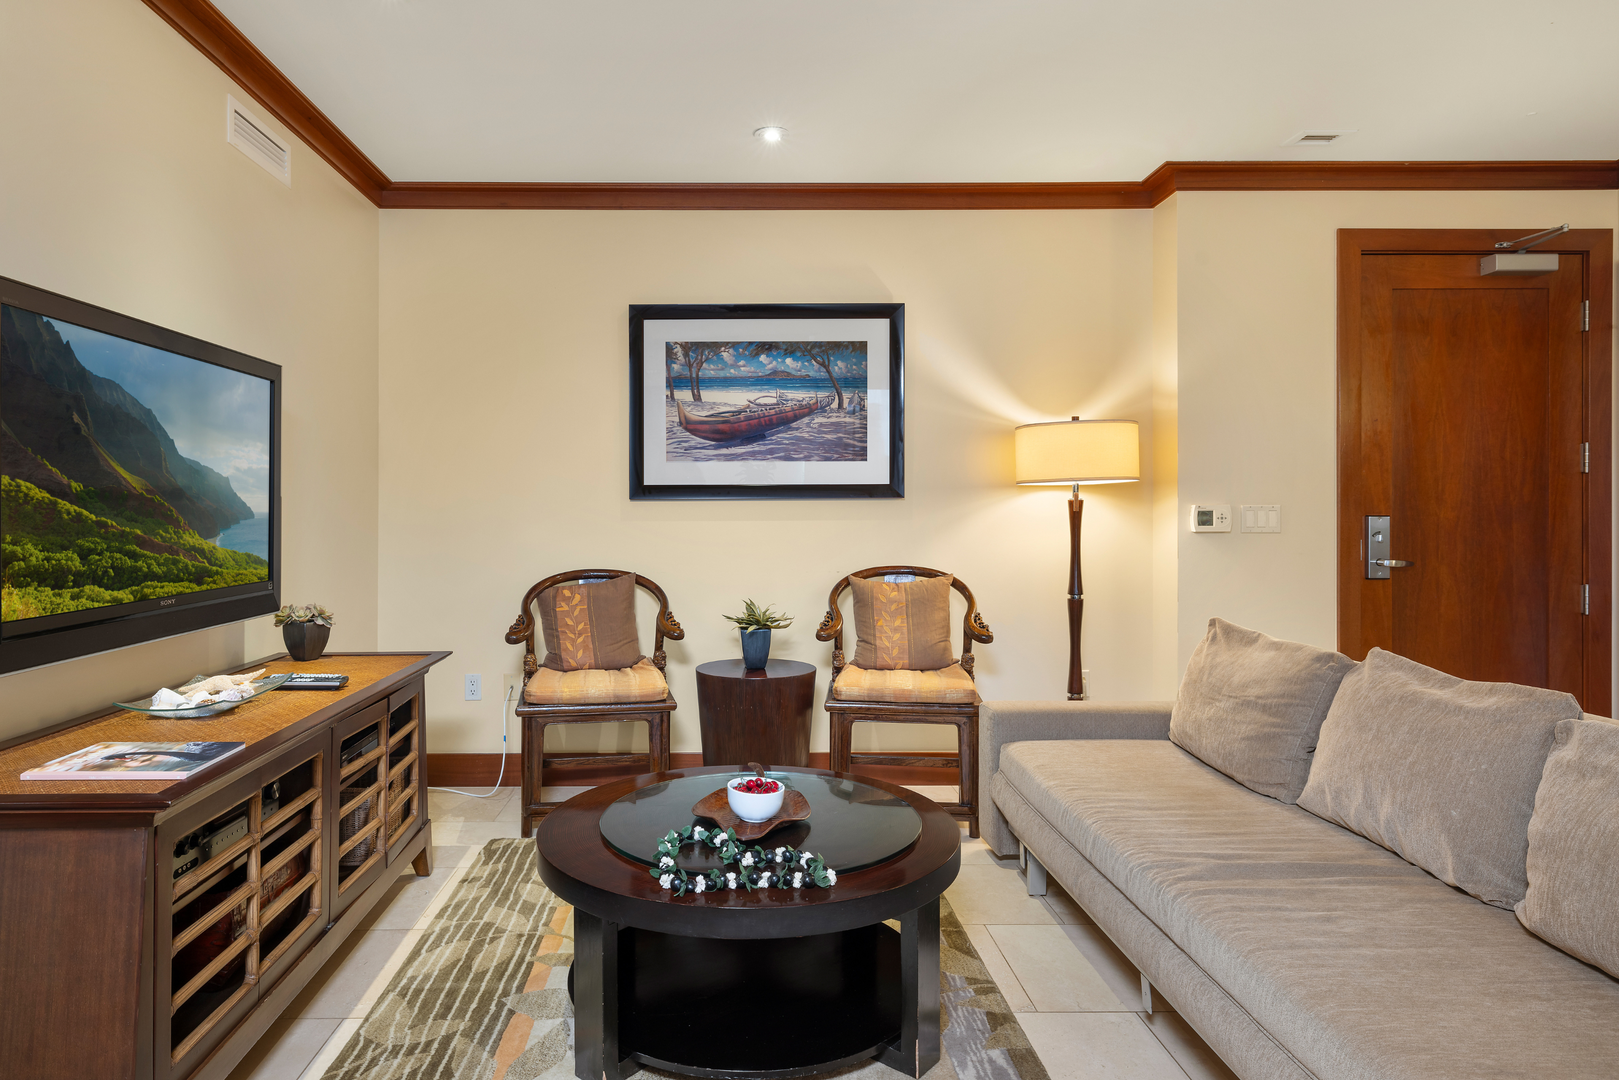 Kapolei Vacation Rentals, Ko Olina Beach Villas O414 - Sink into the plush seating in the living area after a fun day at the beach